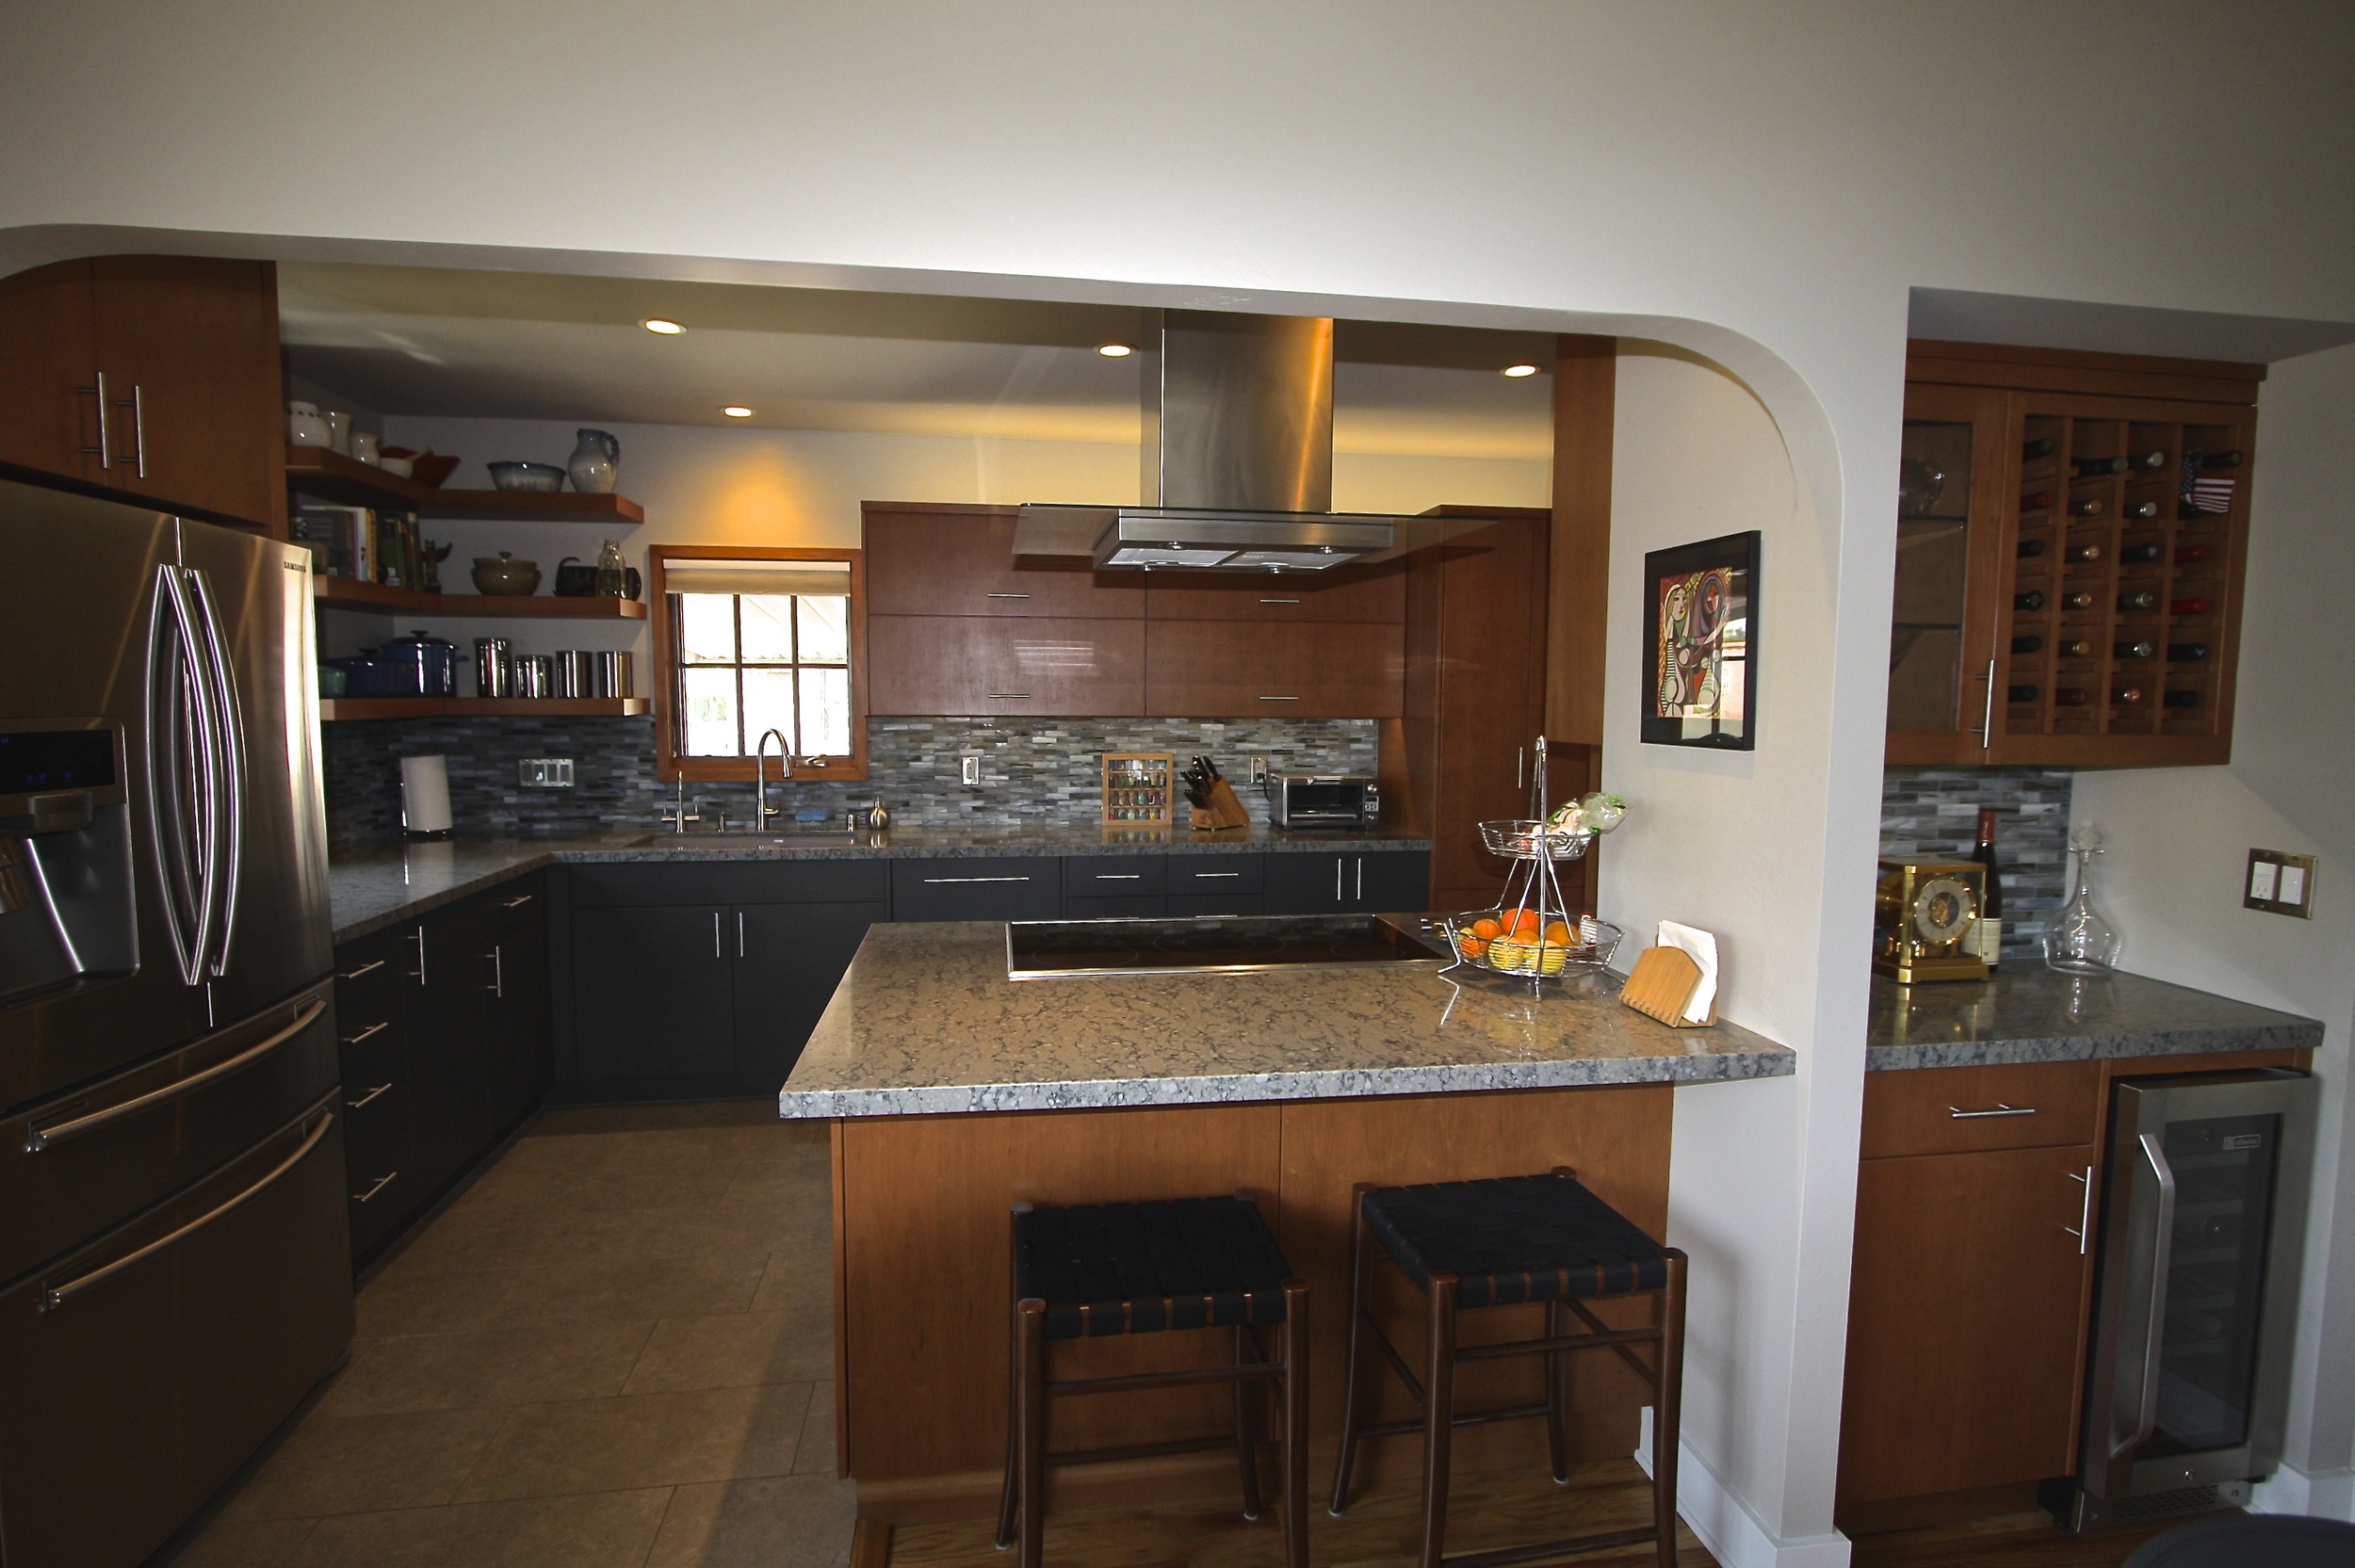  After: The owners both love to cook and bake and they built their dream kitchen to do it in. 